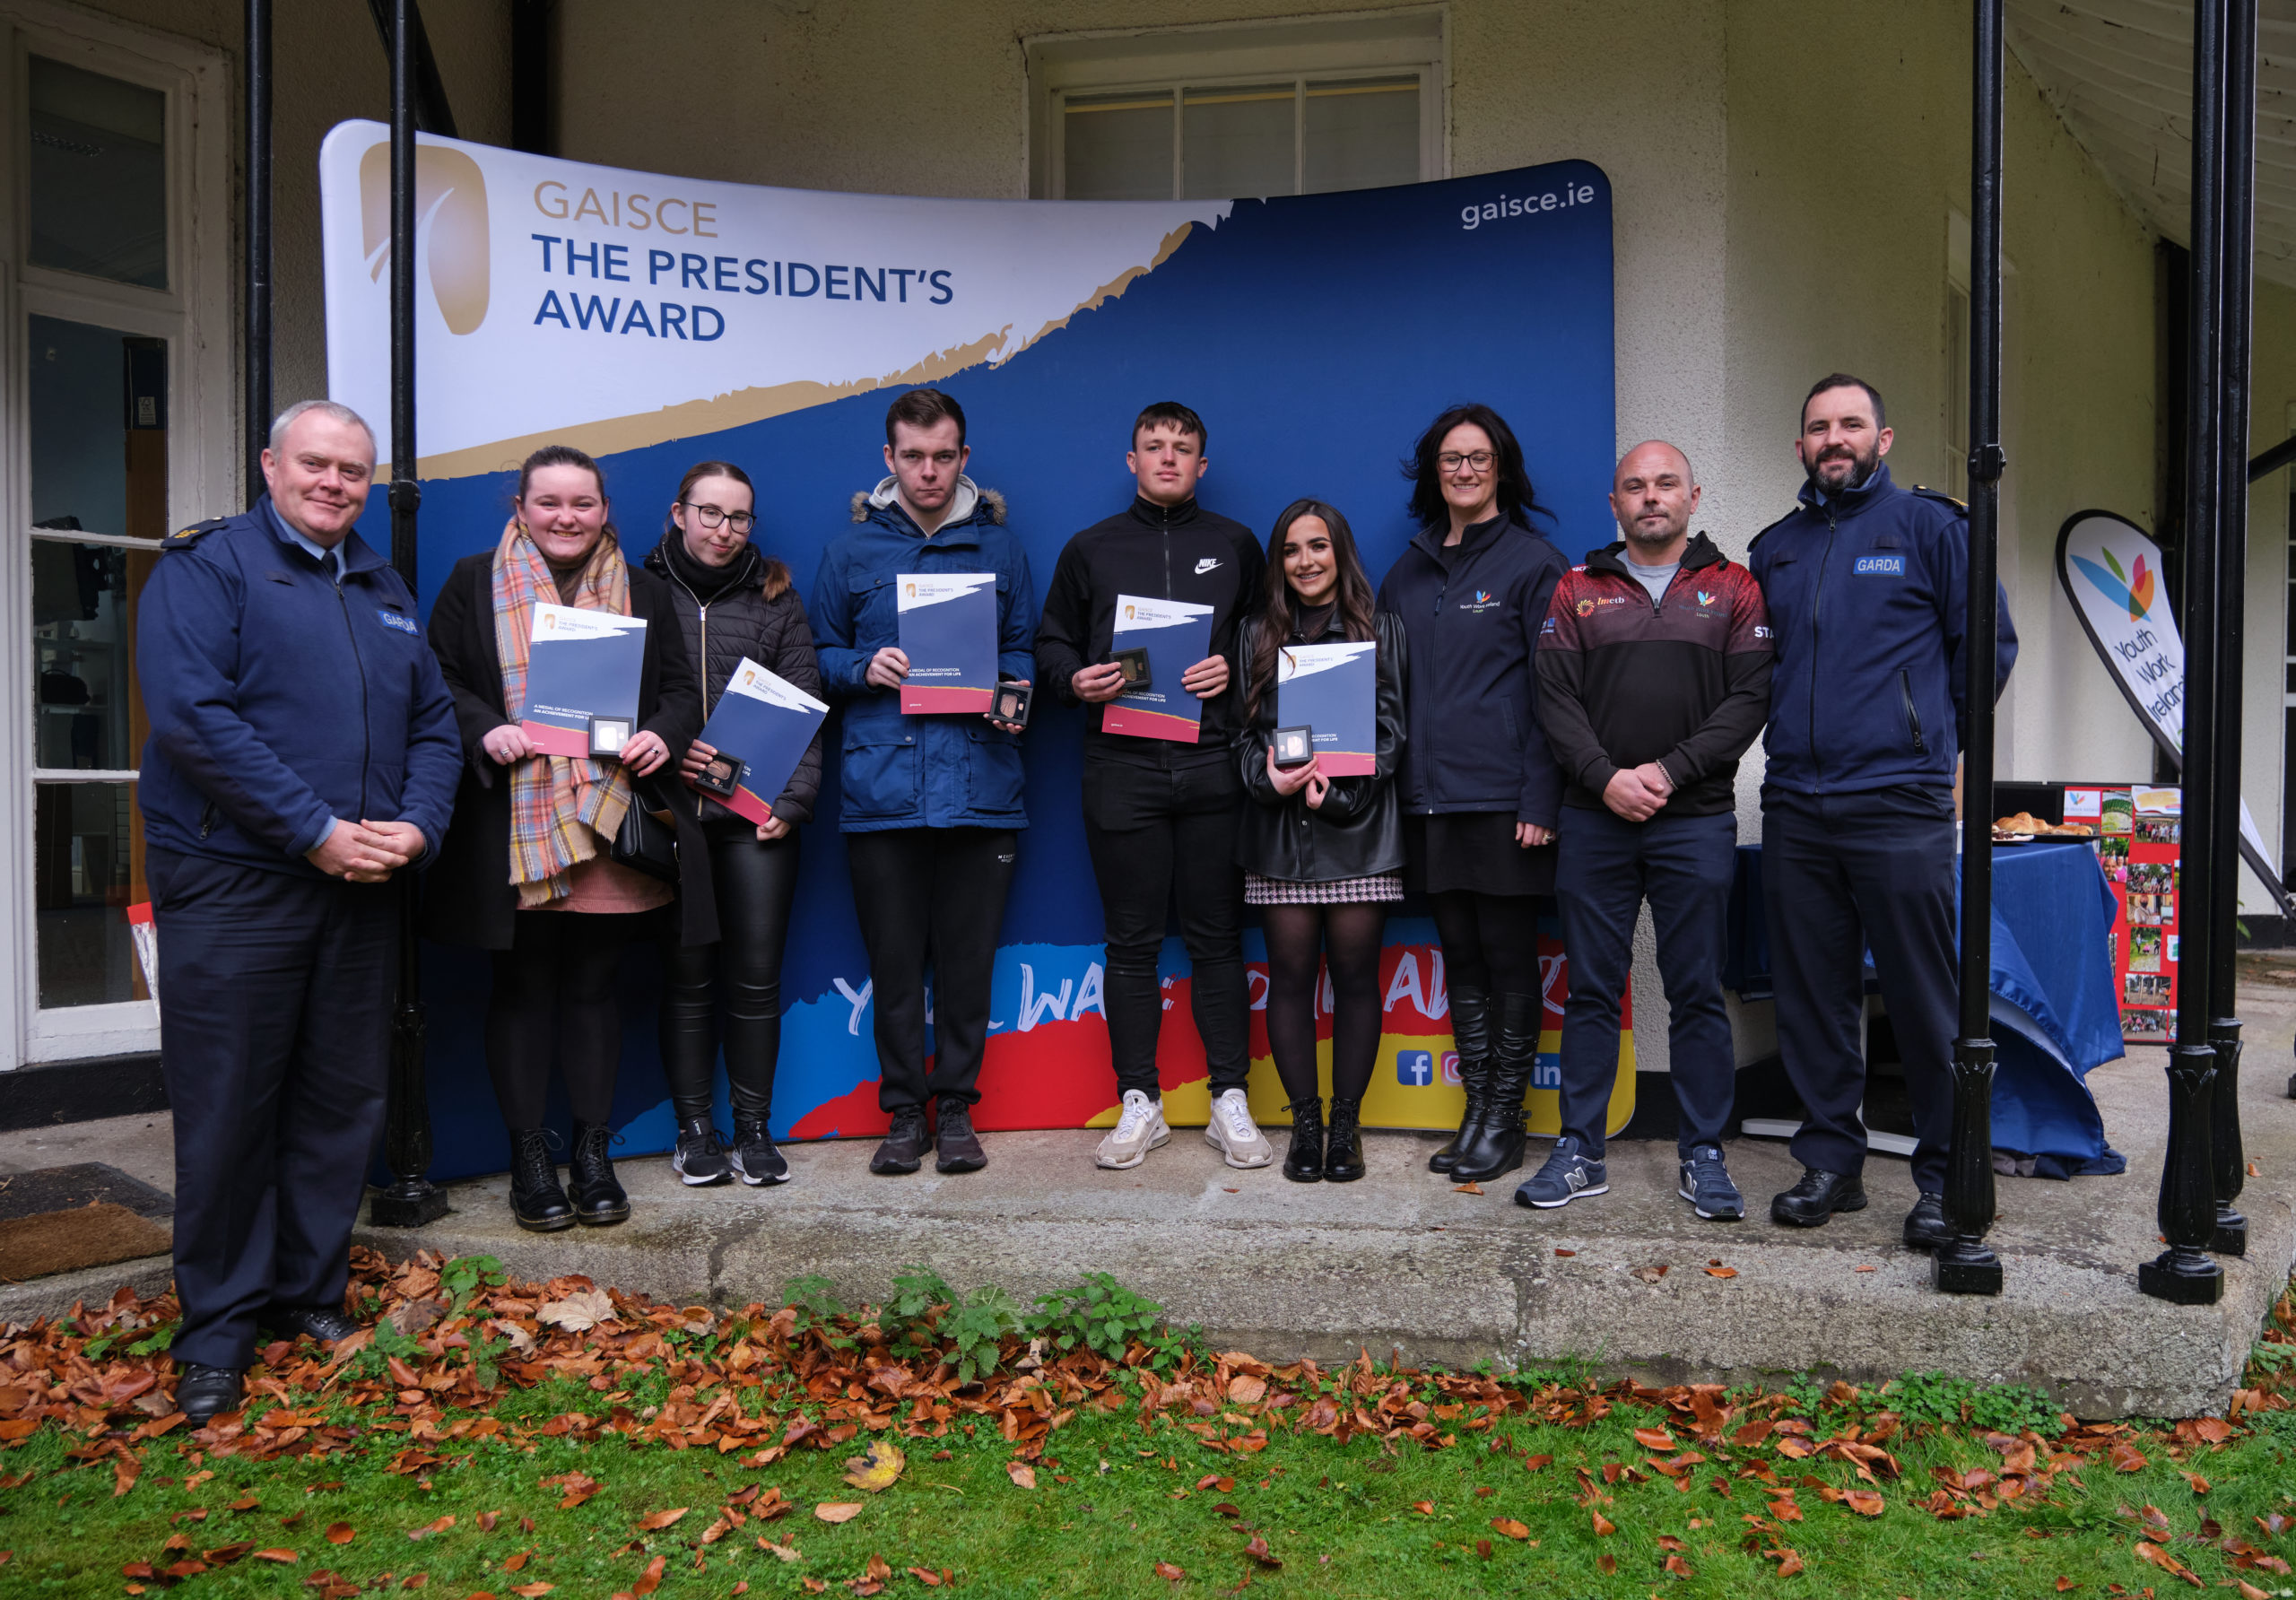 Garda Aidan with Youth Work Ireland Louth participants Iona, Emma, James, Darragh, Chloe, Monica, Keith and Garda Paddy at the Just a Minute bench presentation at Gaisce - The President's Award in Ratra House 